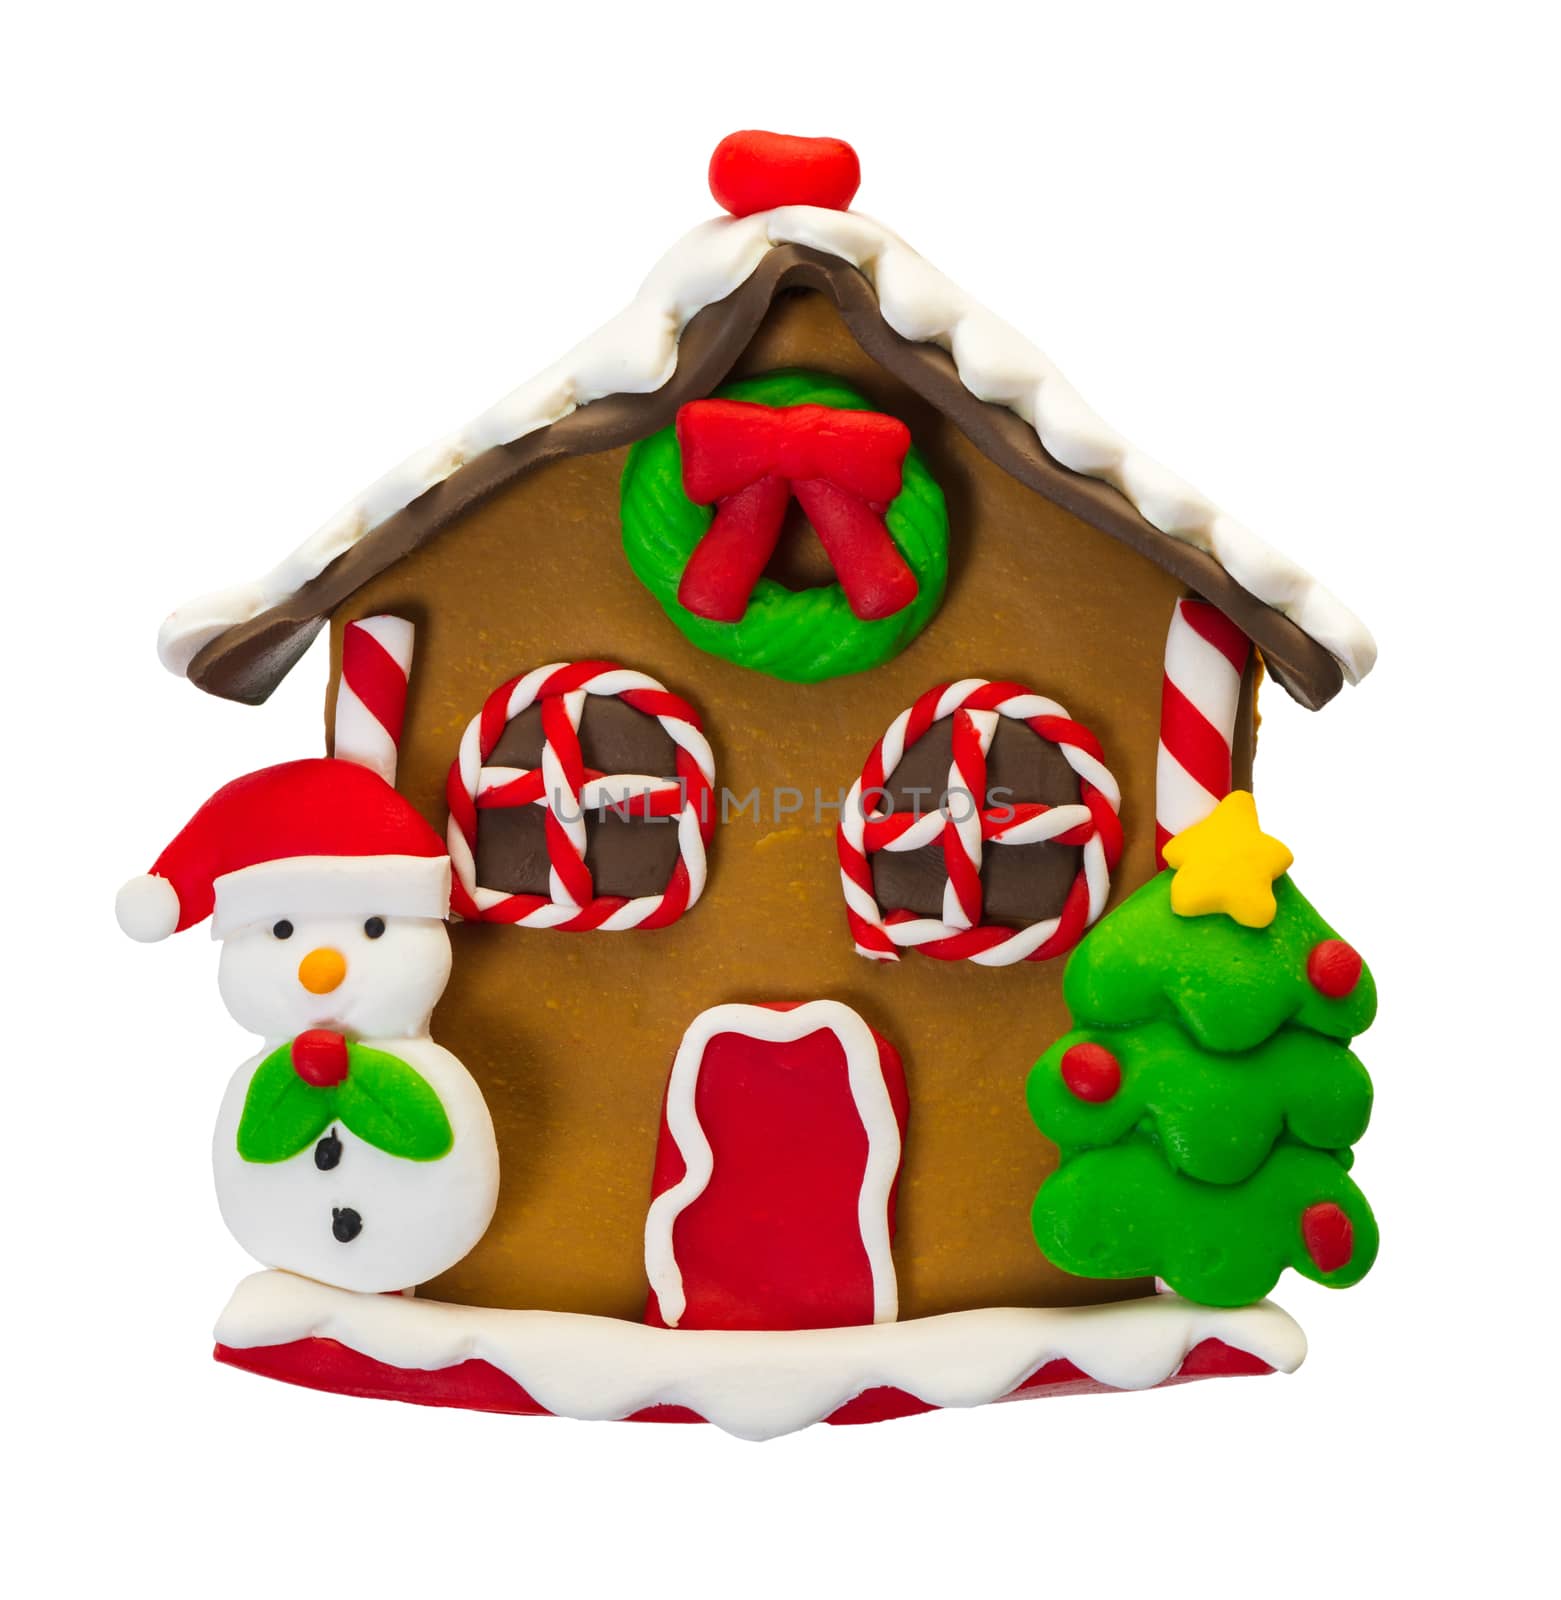 Christmas gingerbread house on white isolated background